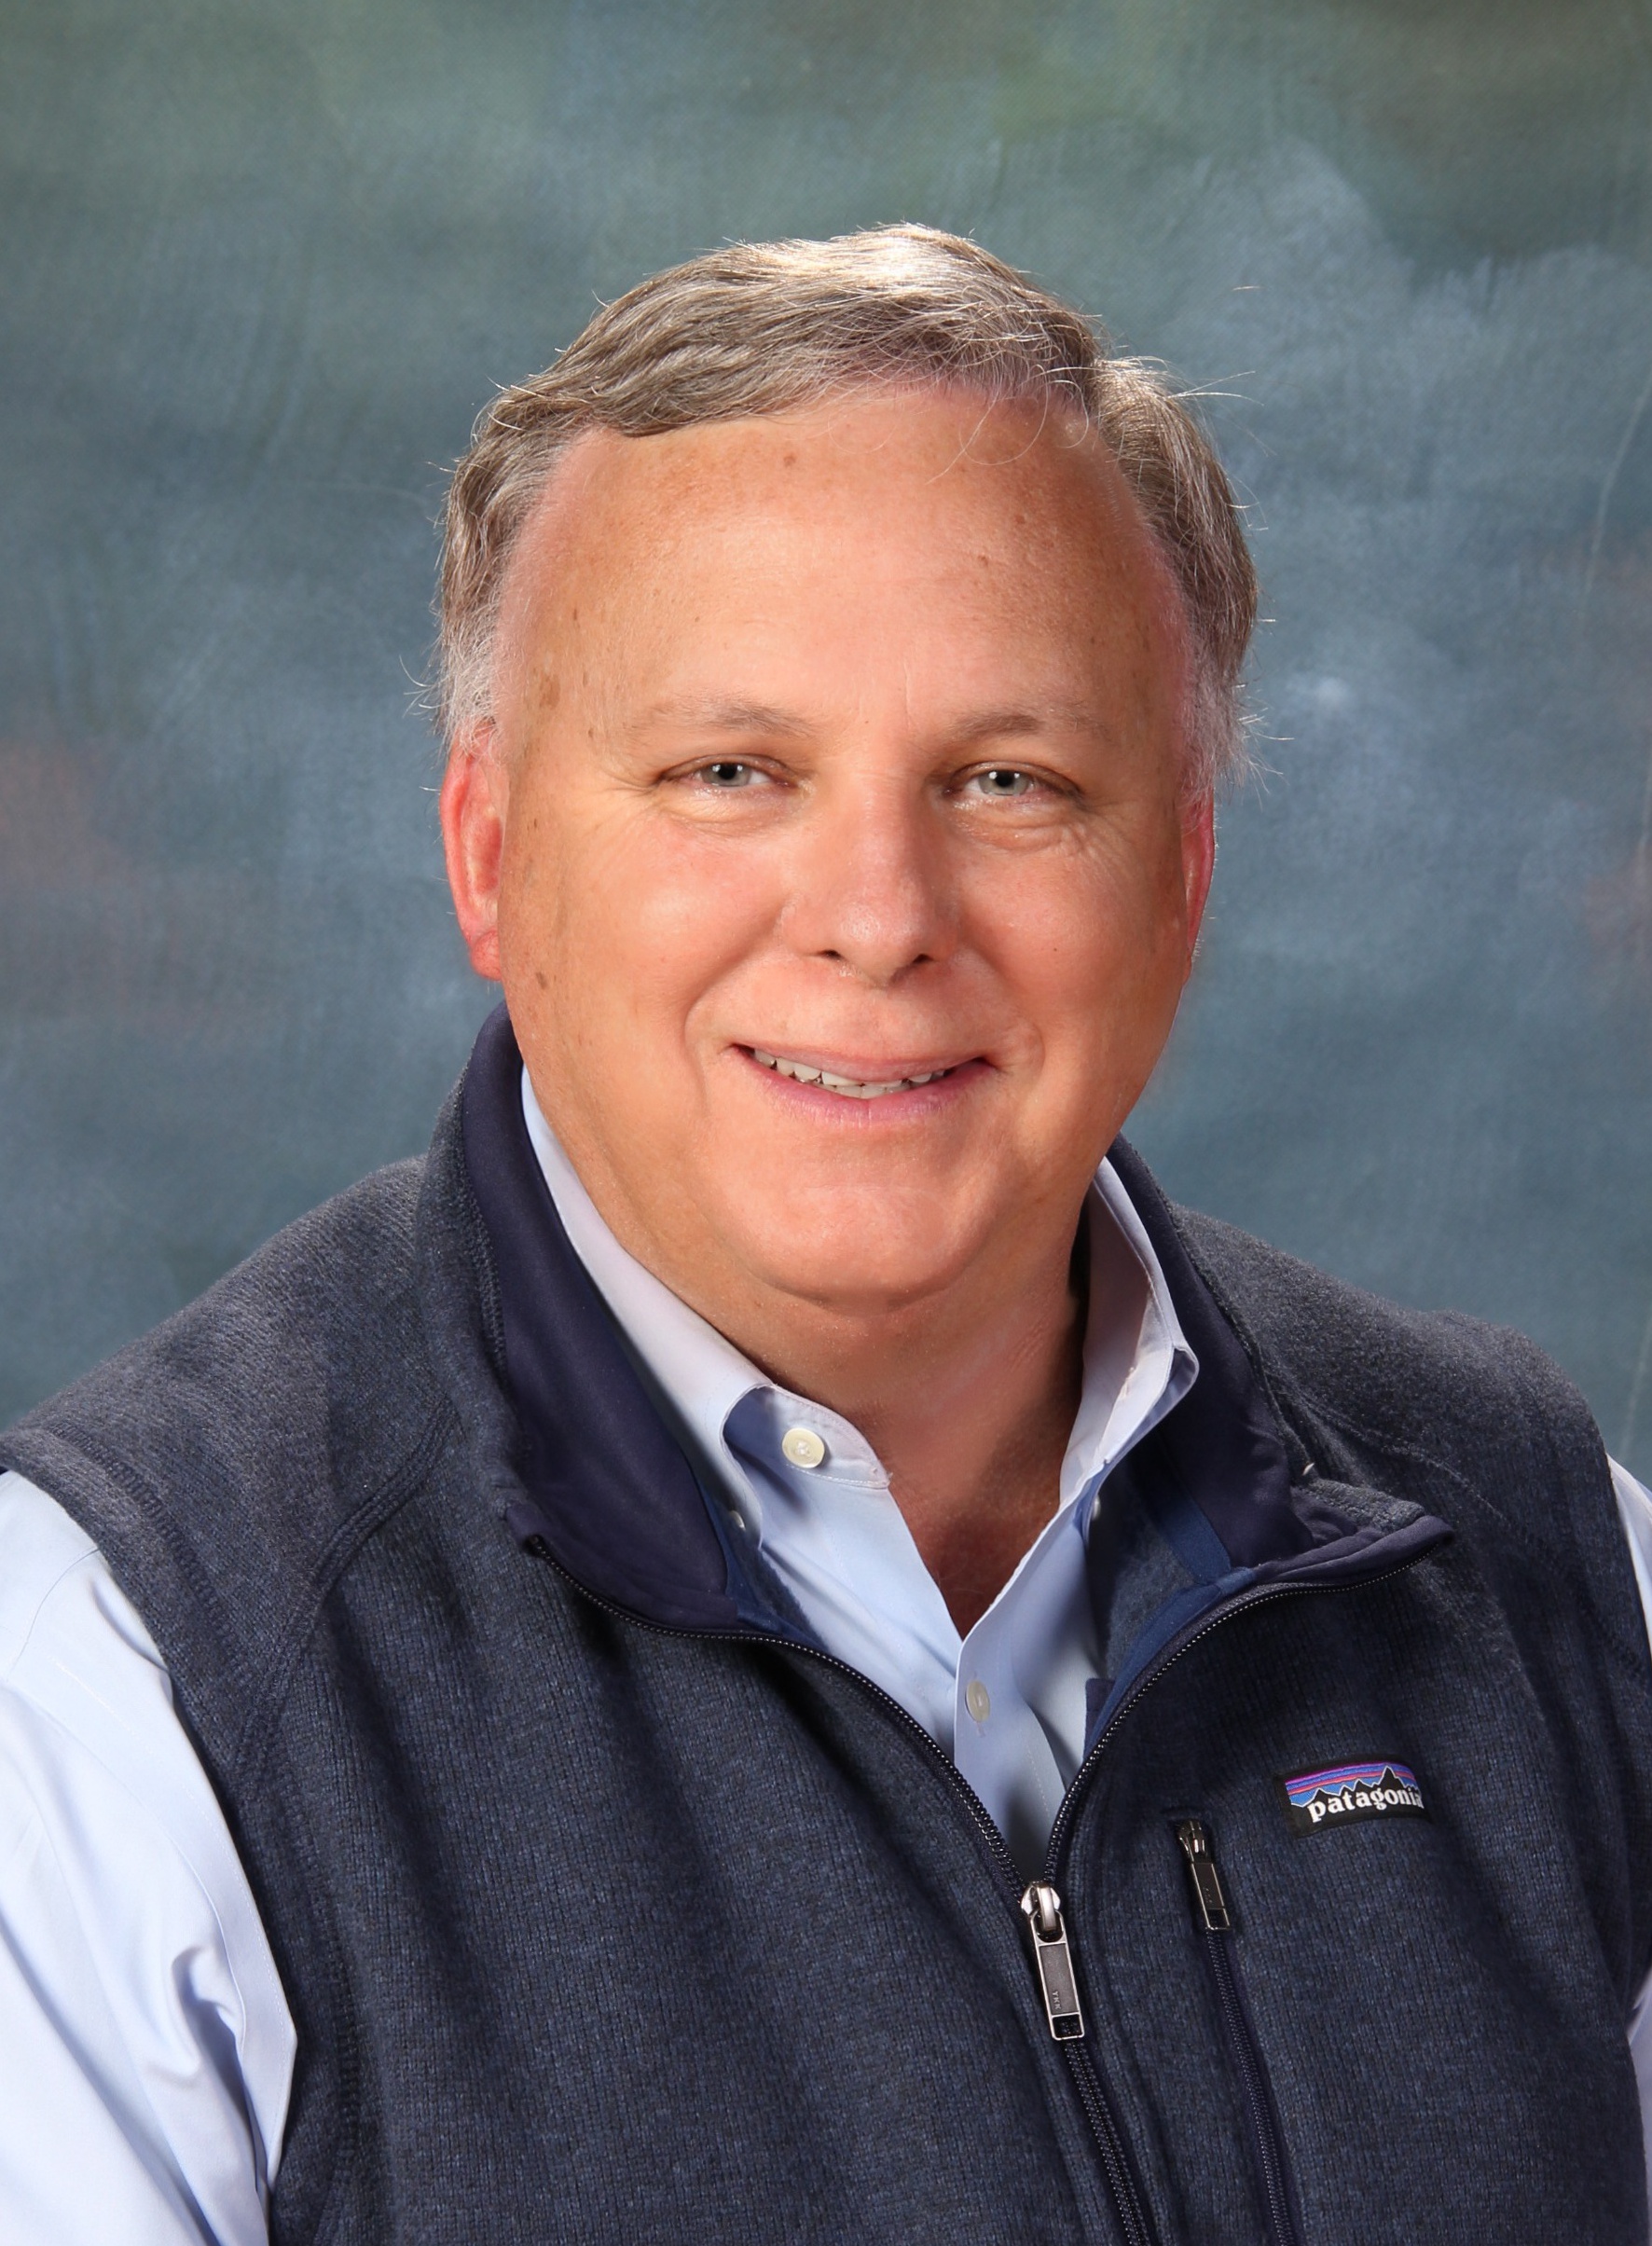 Trussville city councilman Buddy Choat enters mayoral race